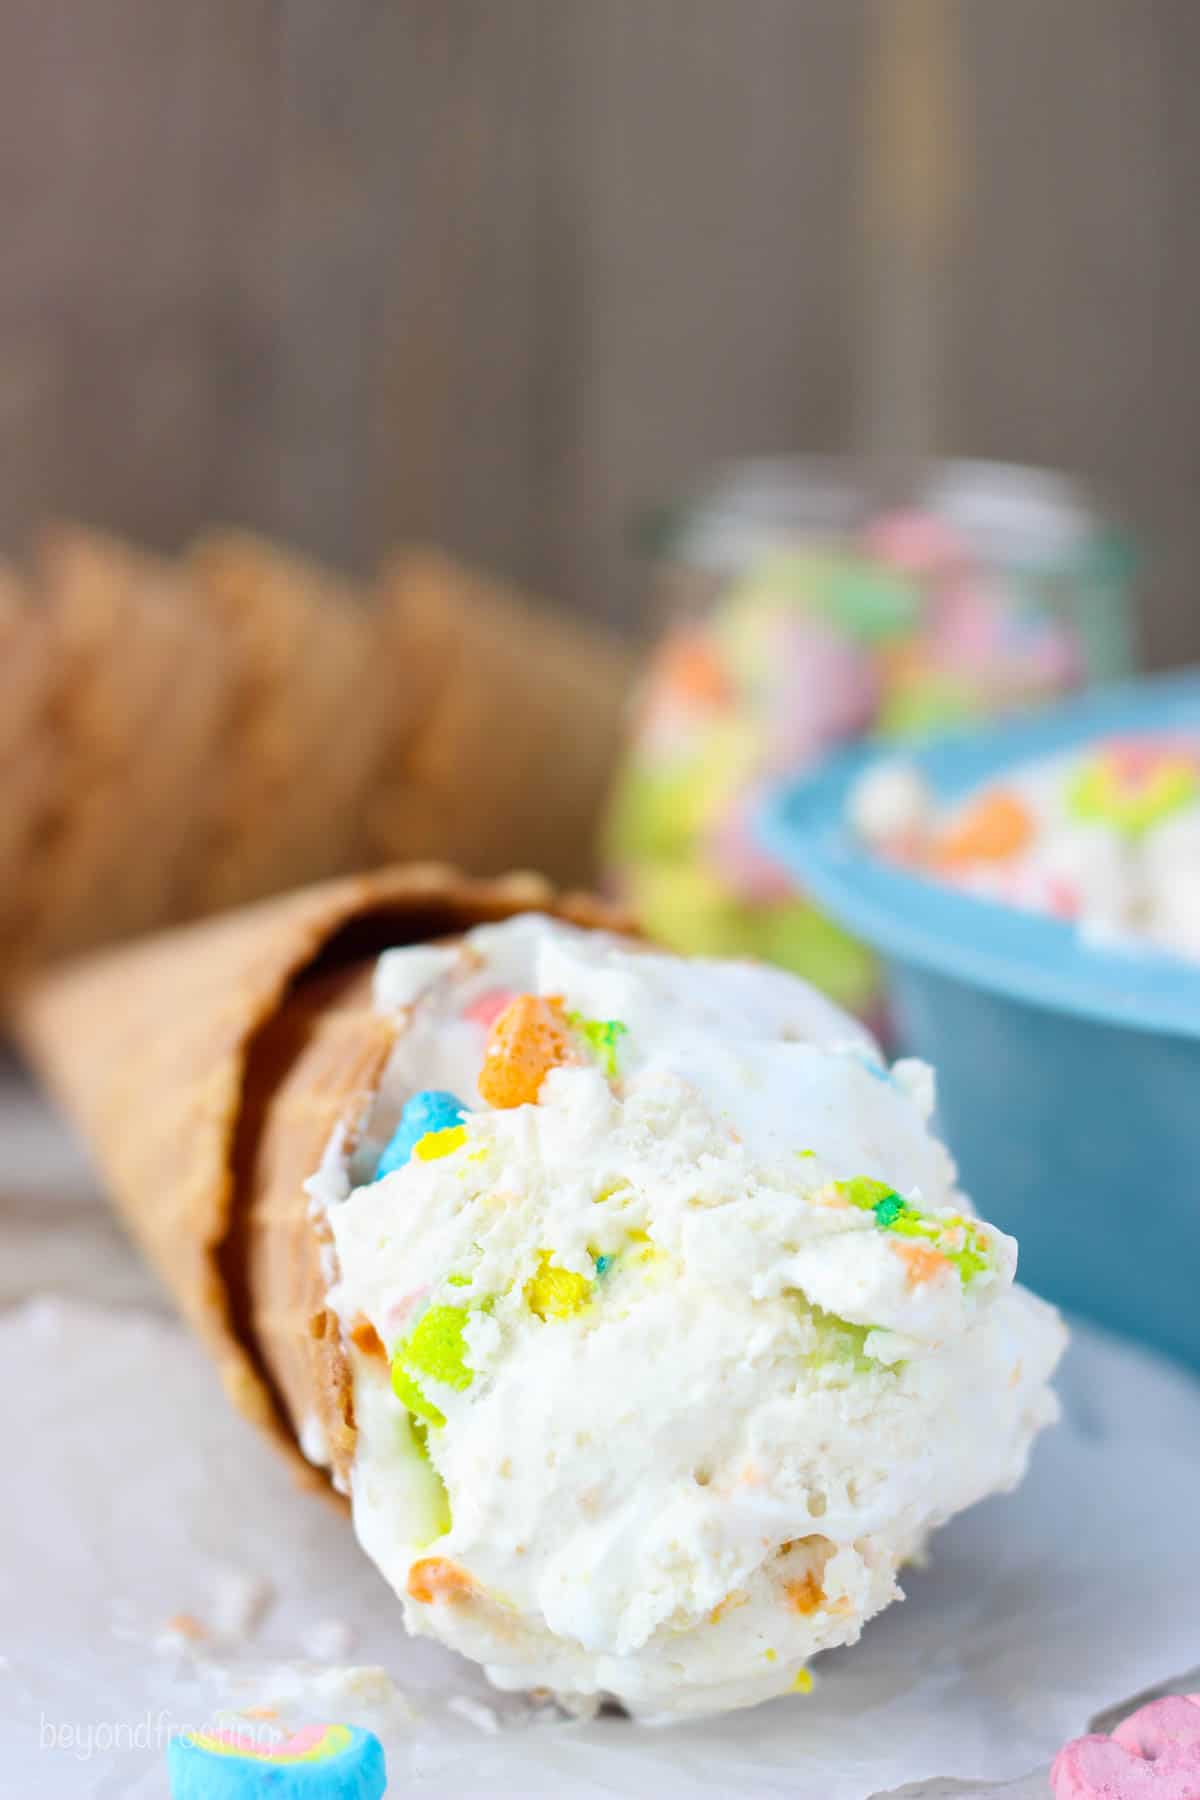 A scoop of Lucky charms ice cream in a cone